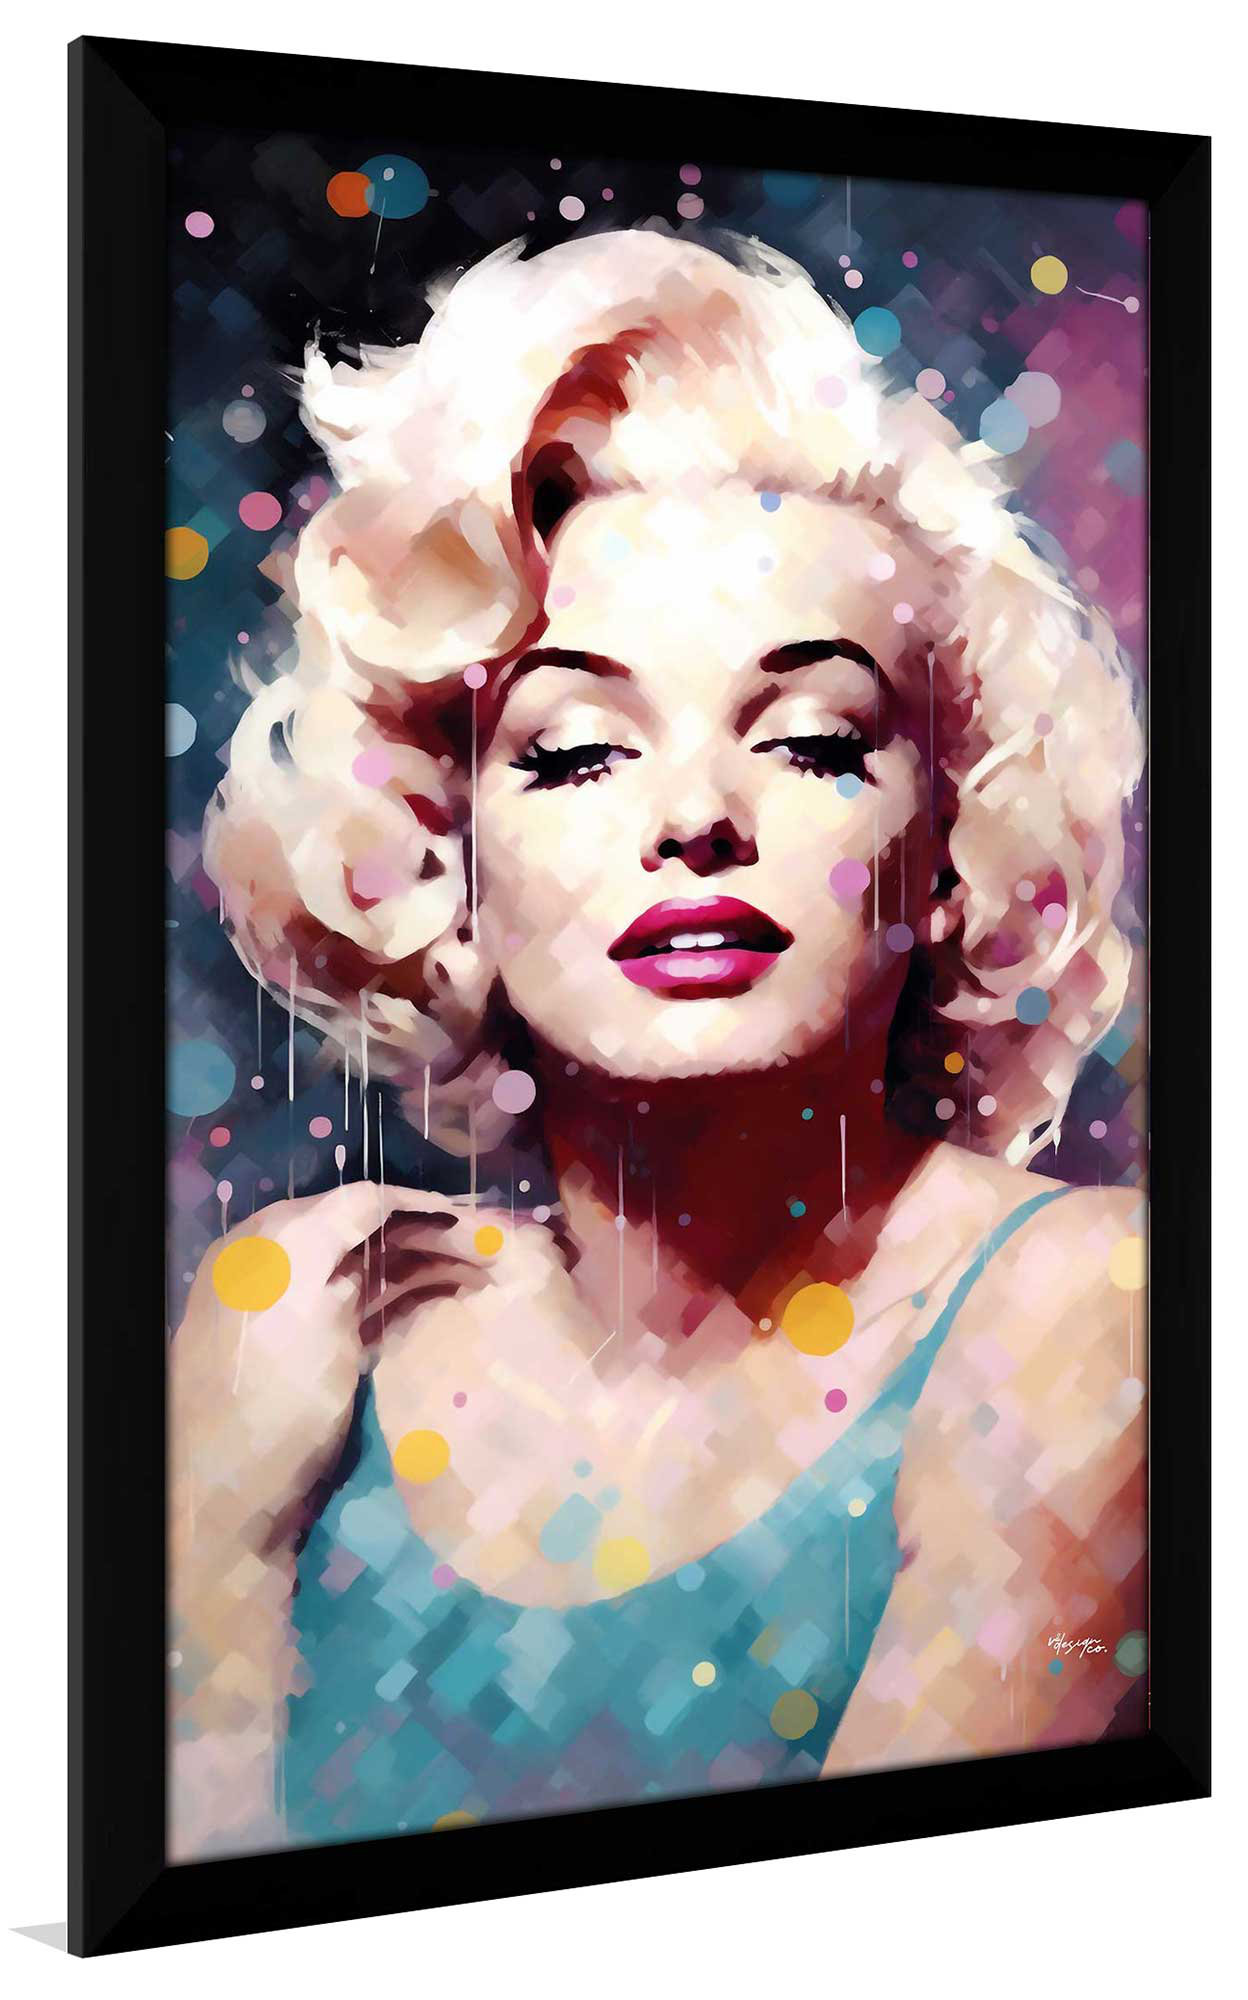 Marilyn Monroe White Dress 7 Year Itch On Paper Print